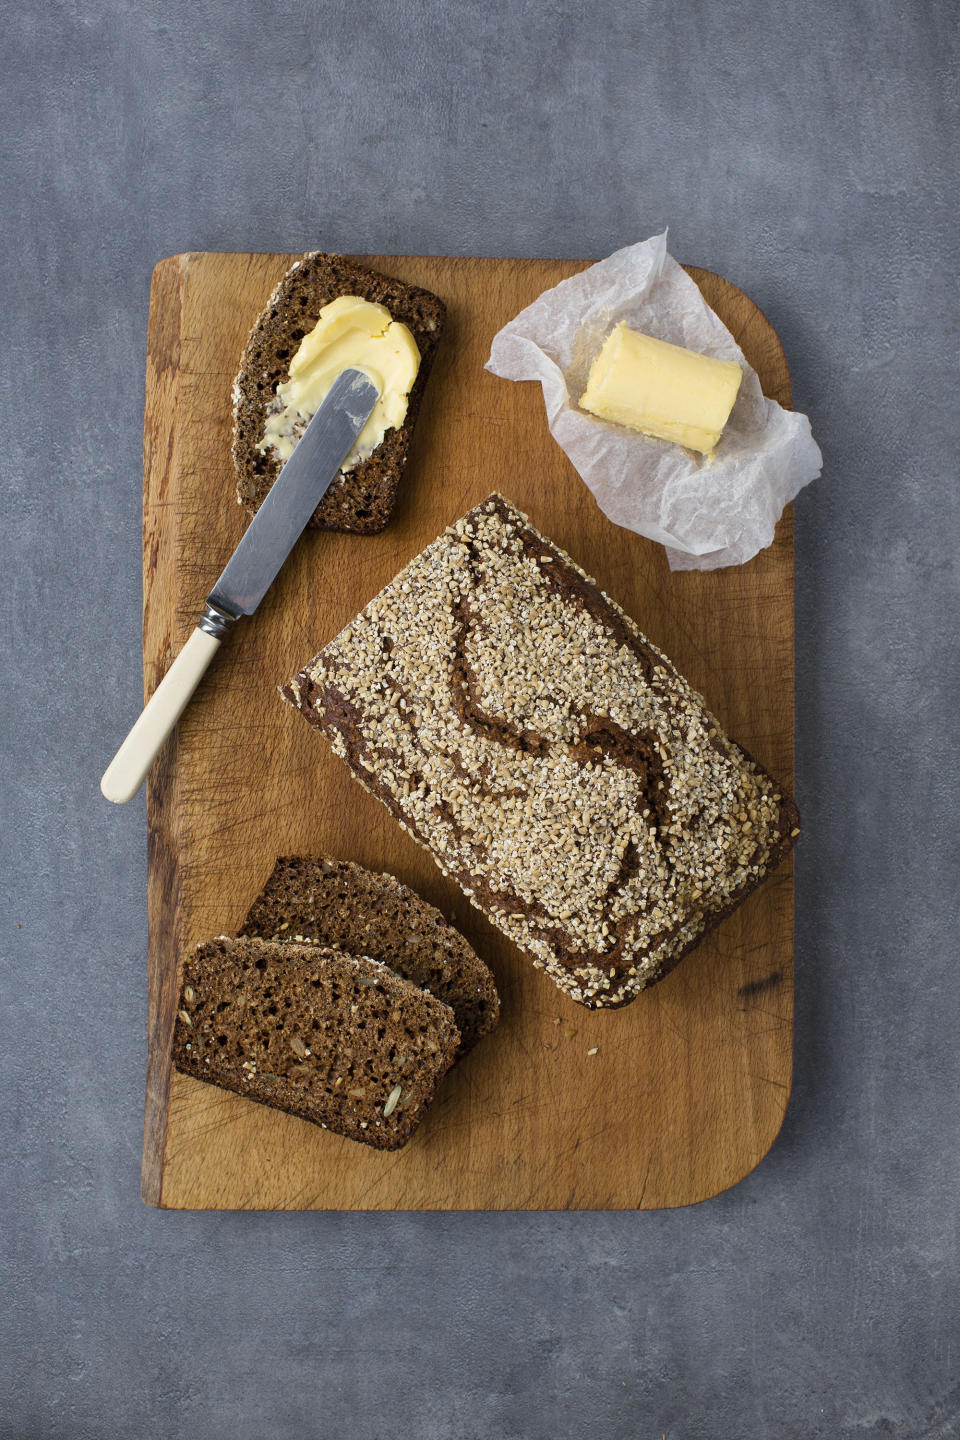 This image shows a recipe for Irish soda bread made with with stout beer and treacle from chef Jp McMahon’s "The Irish Cookbook.” (Anita Murphy via AP)